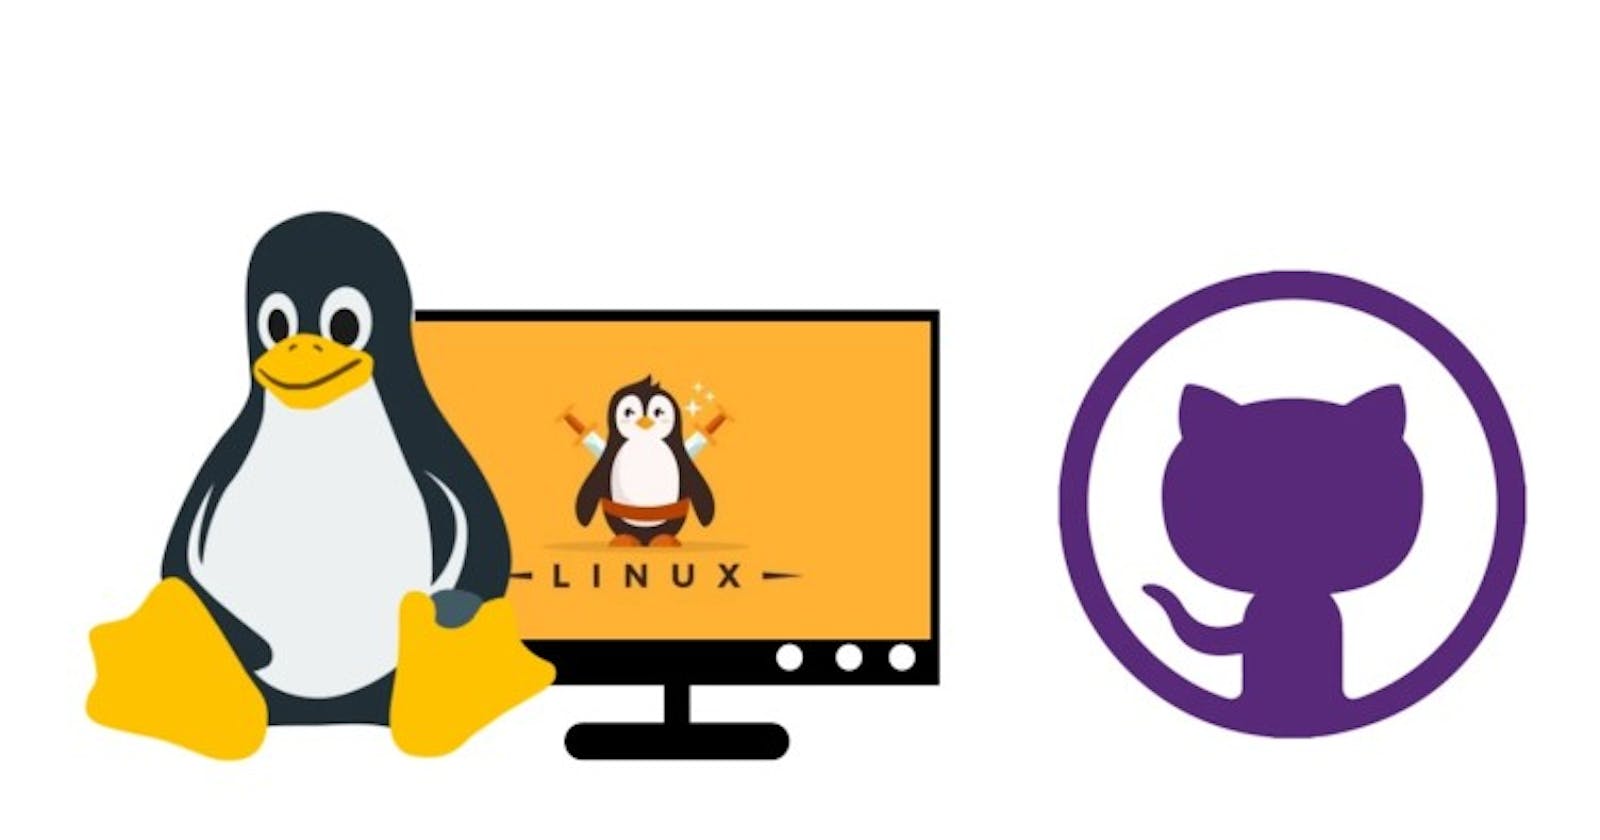 Mastering Git and GitHub: A Comprehensive Cheat Sheet for Linux Users